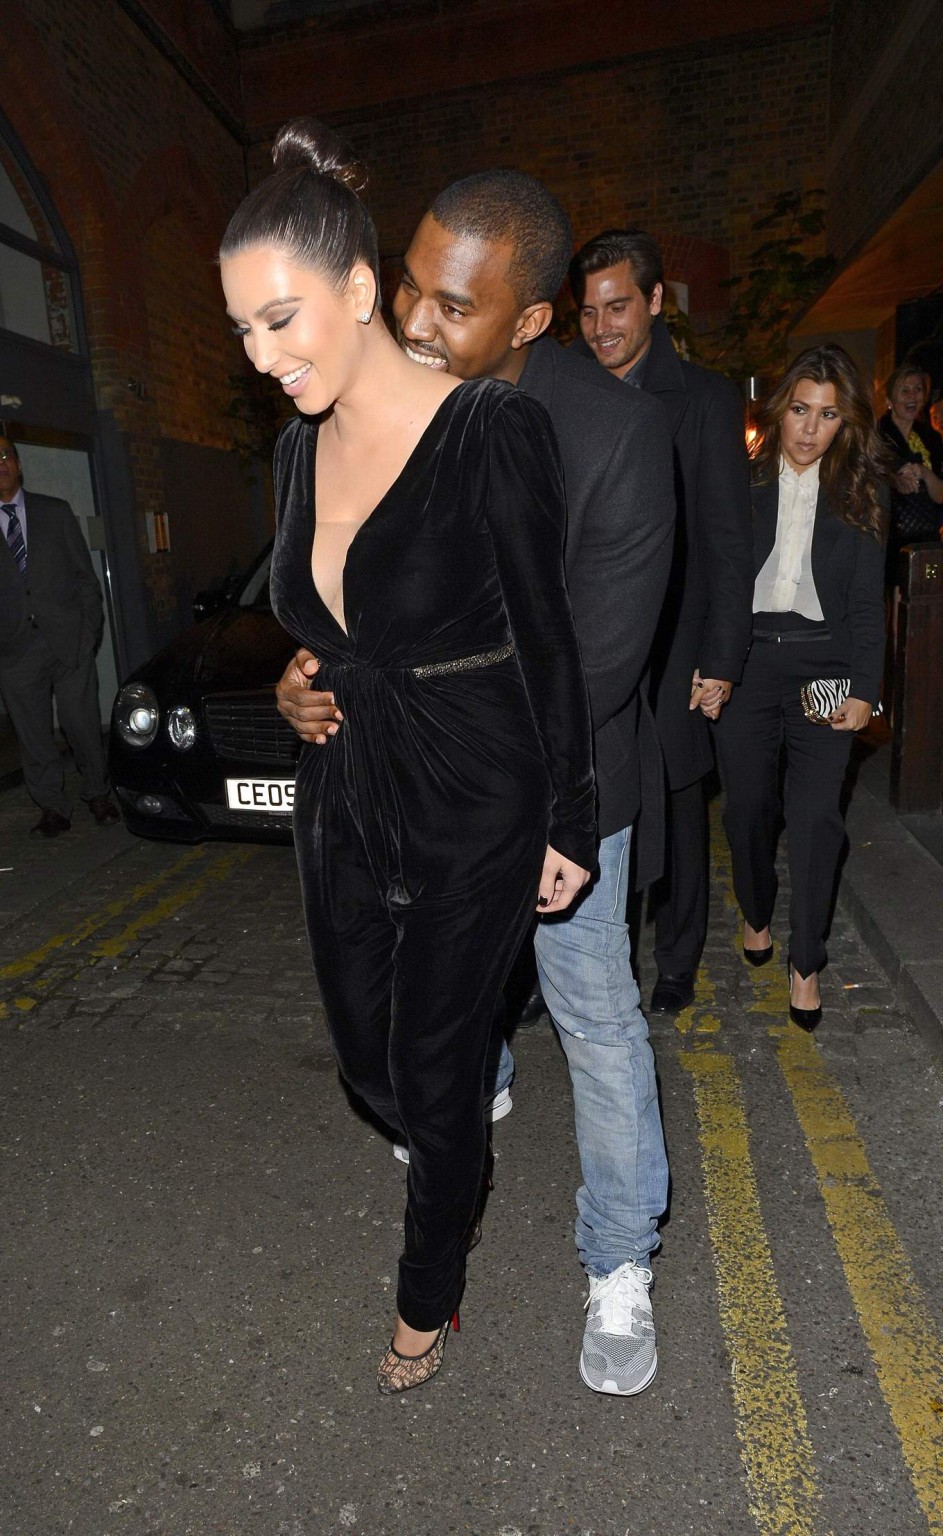 Kim Kardashian shows cleavage  pokies wearing a sexy black outfit outside a rest